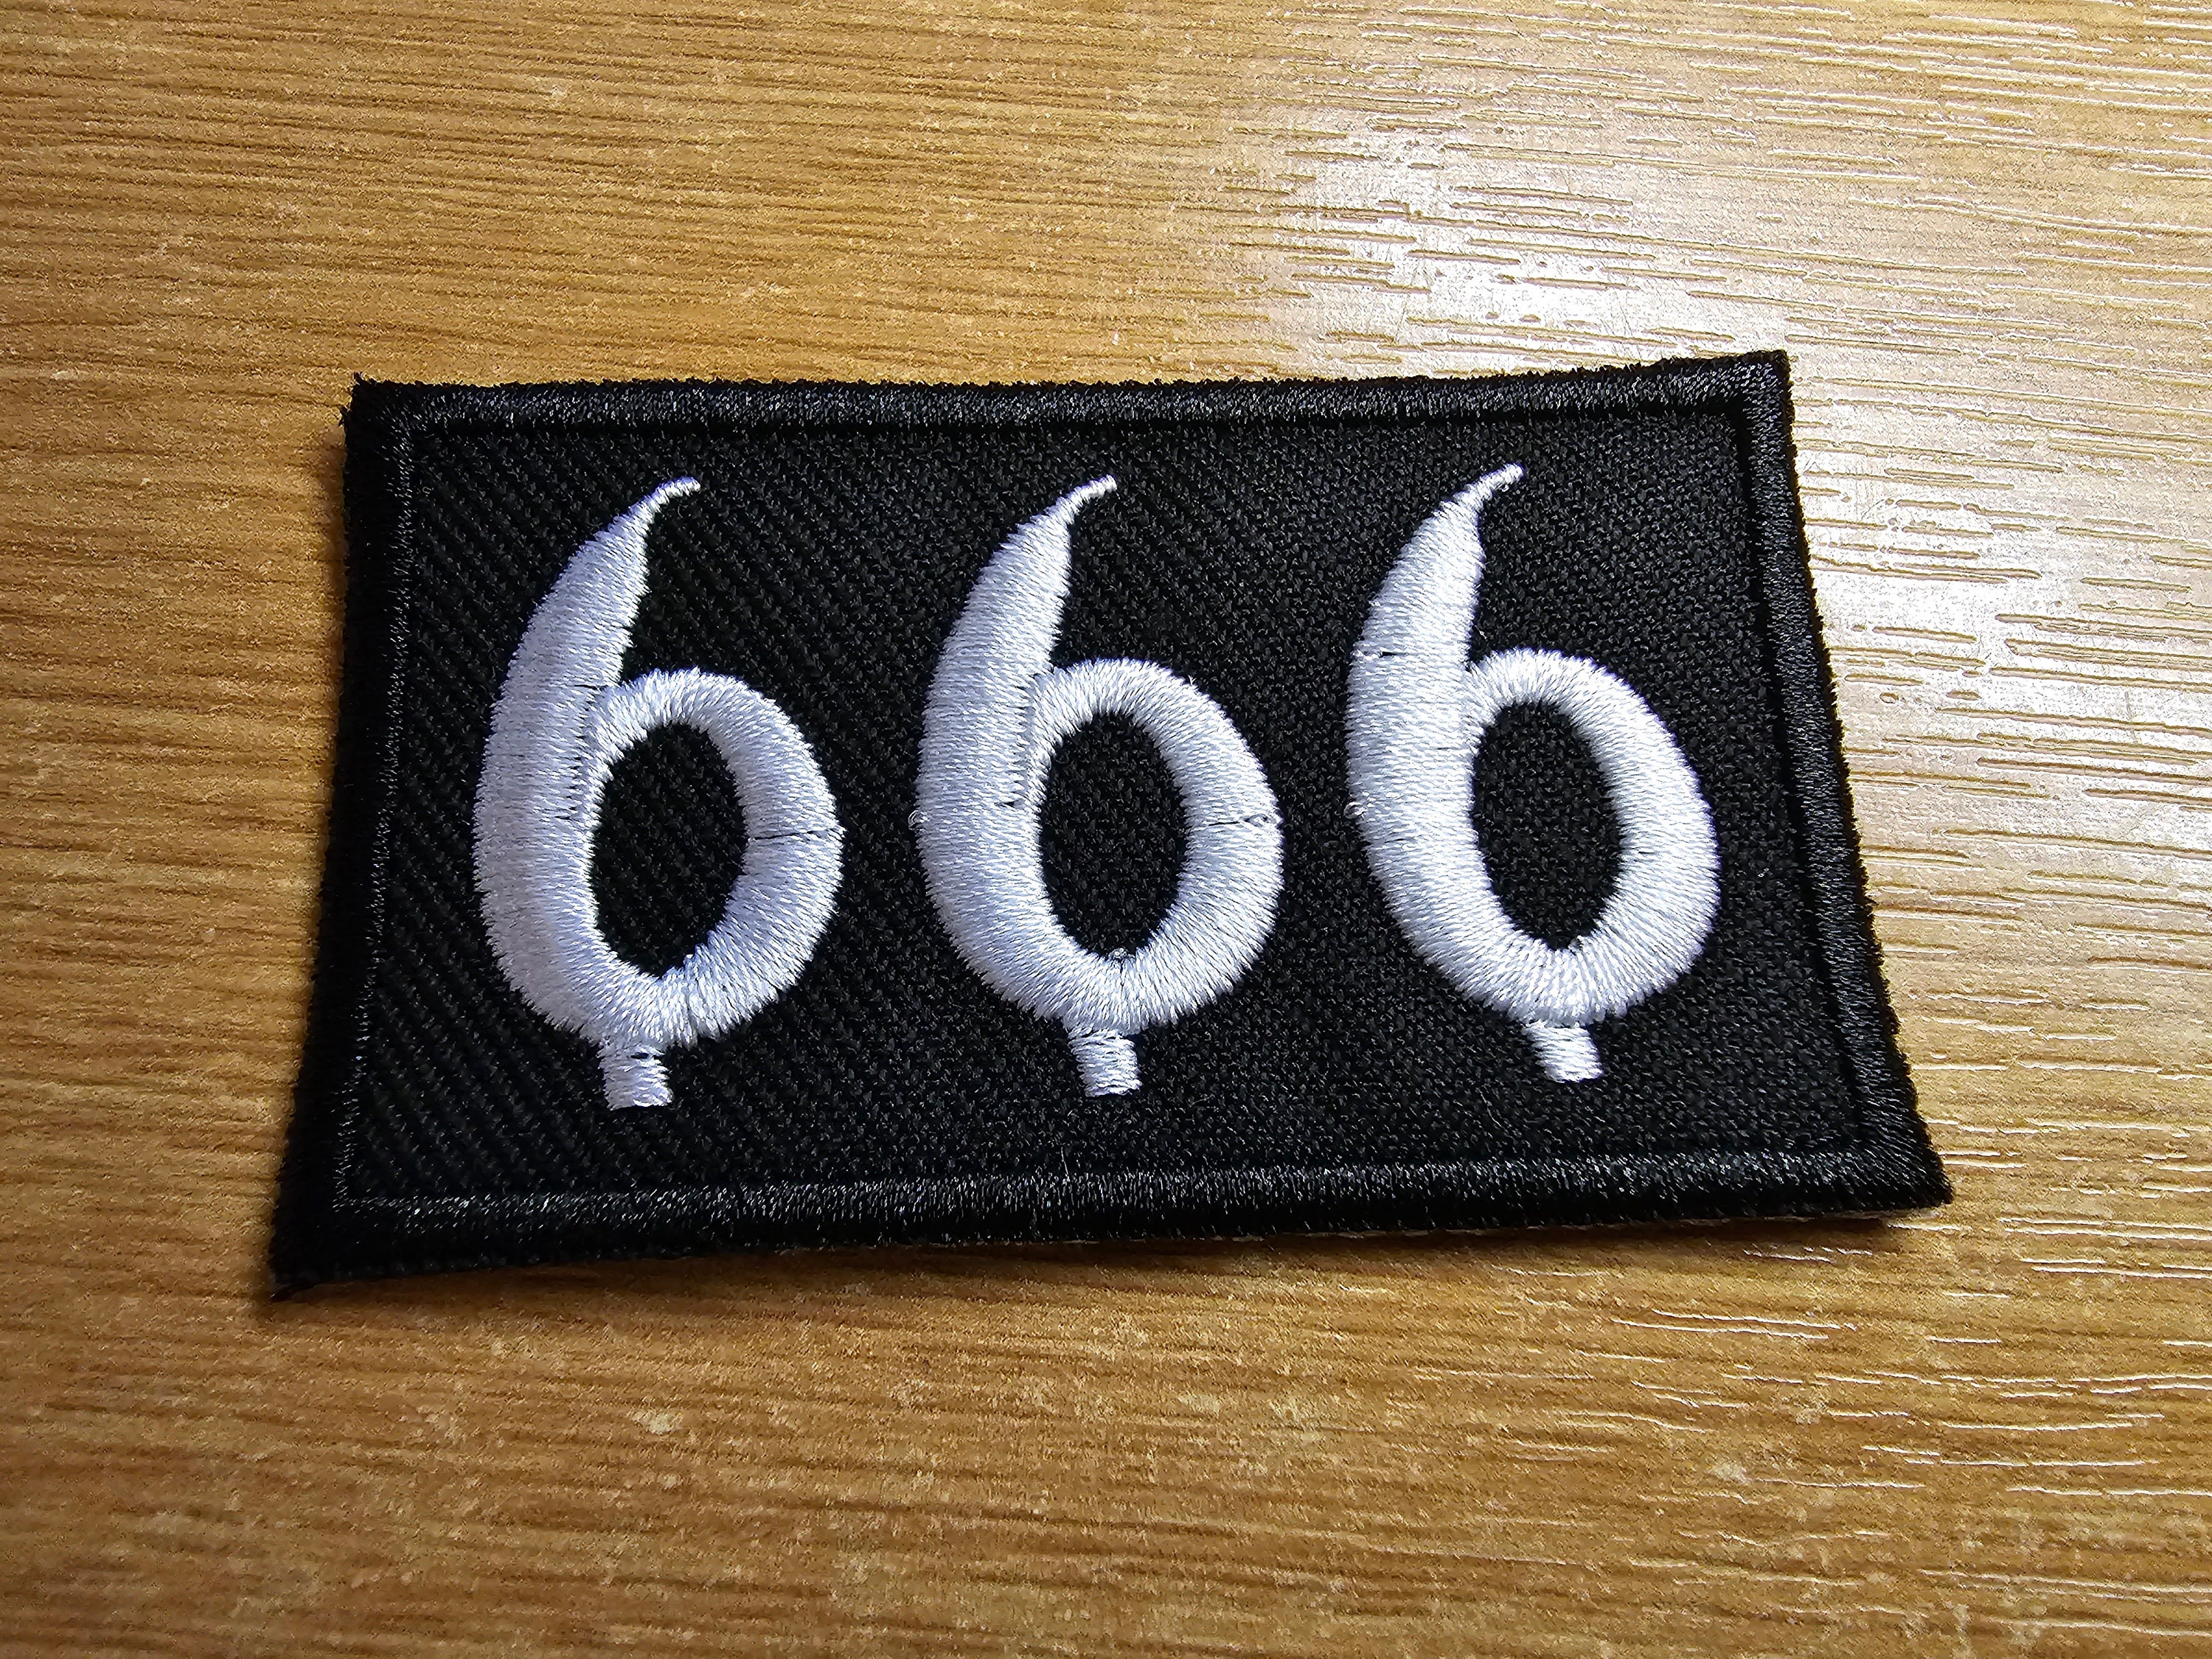 Kreepsville 666 Arch 666% Evil Patch Horror Embroidered On Iron